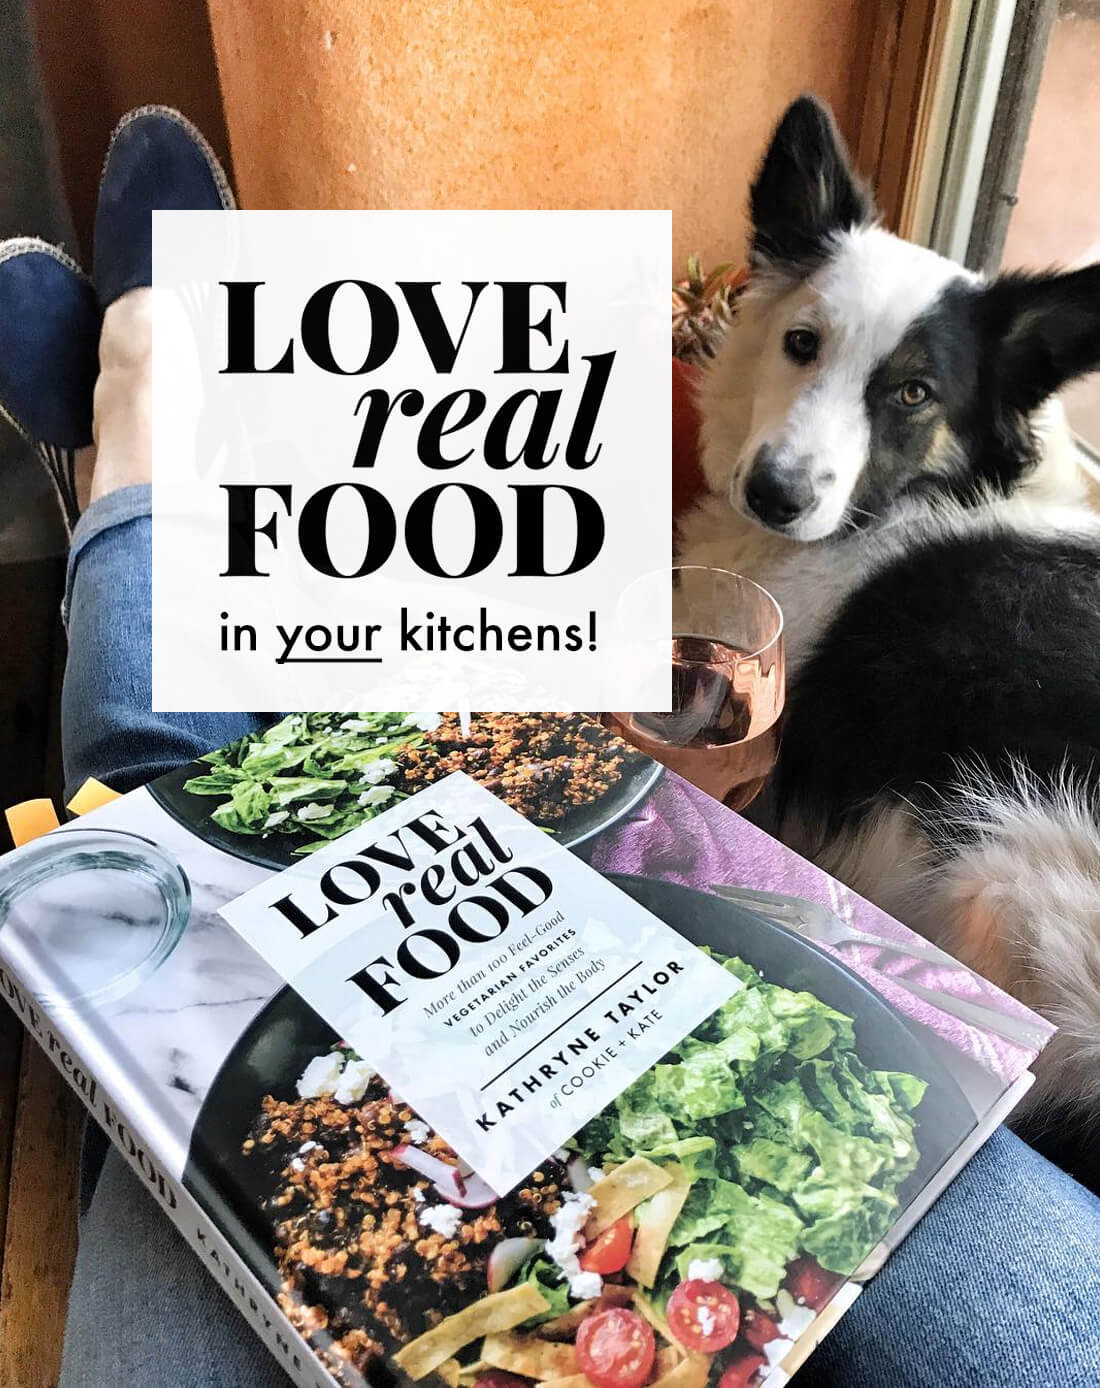 Love Real Food in your kitchens!